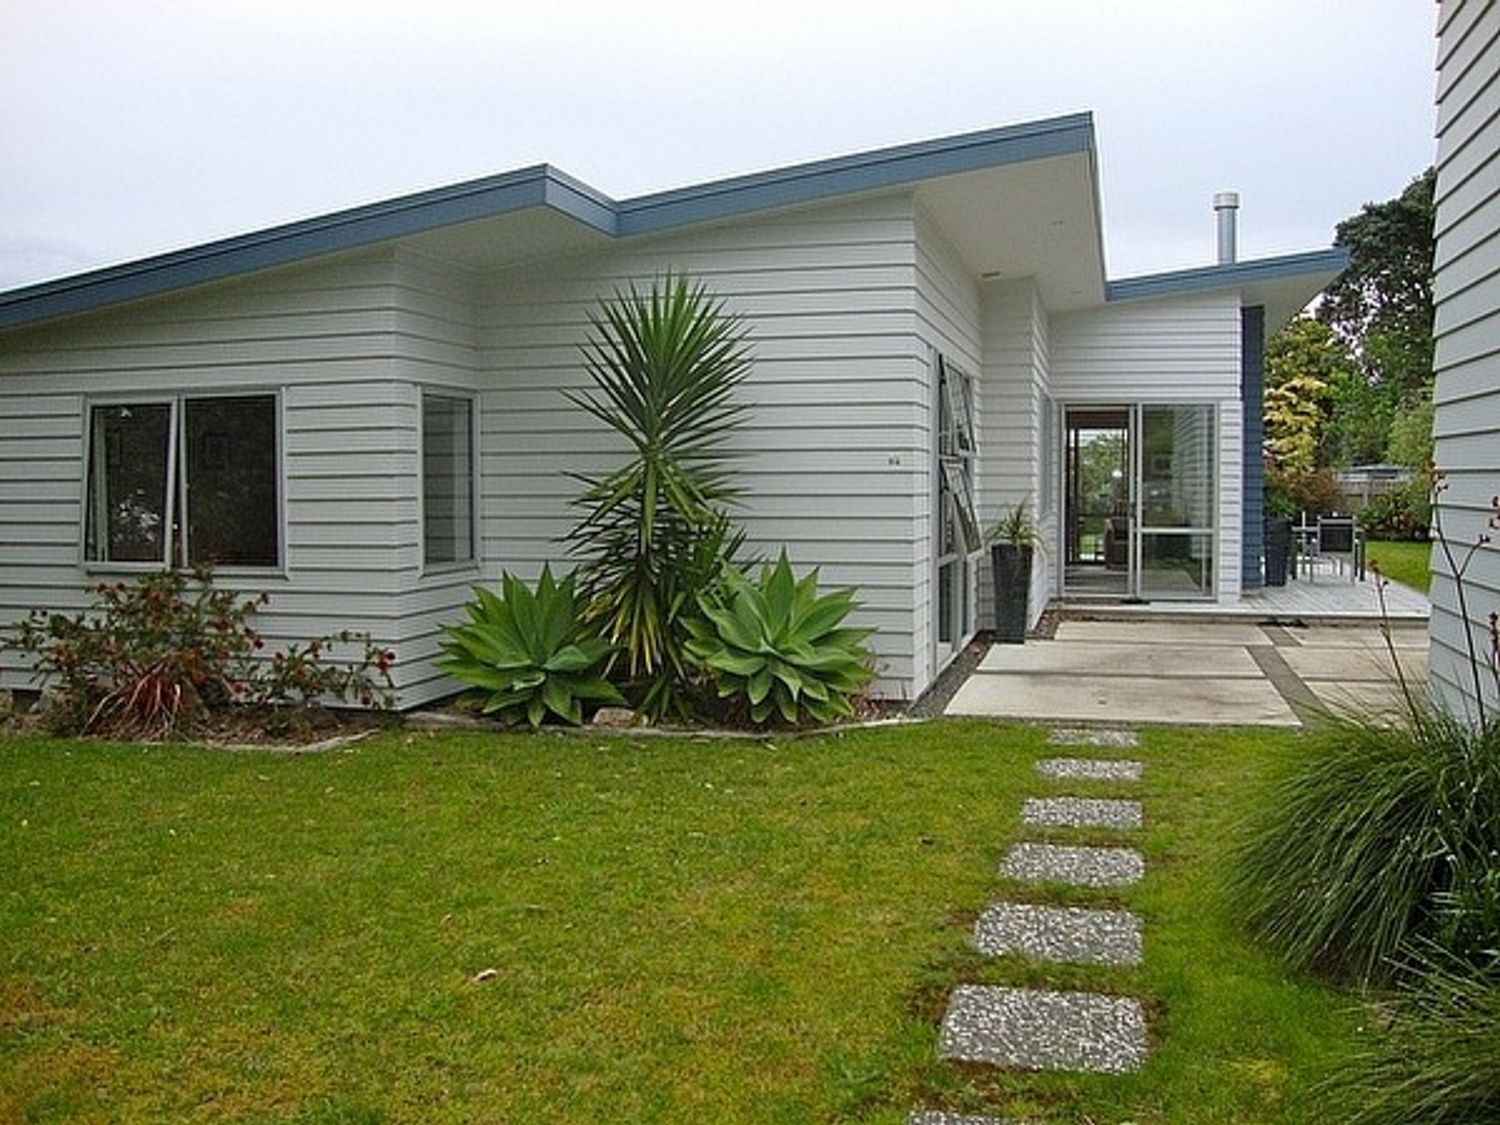 Relax at Cooks - Cooks Beach Holiday Home -  - 1029896 - photo 1